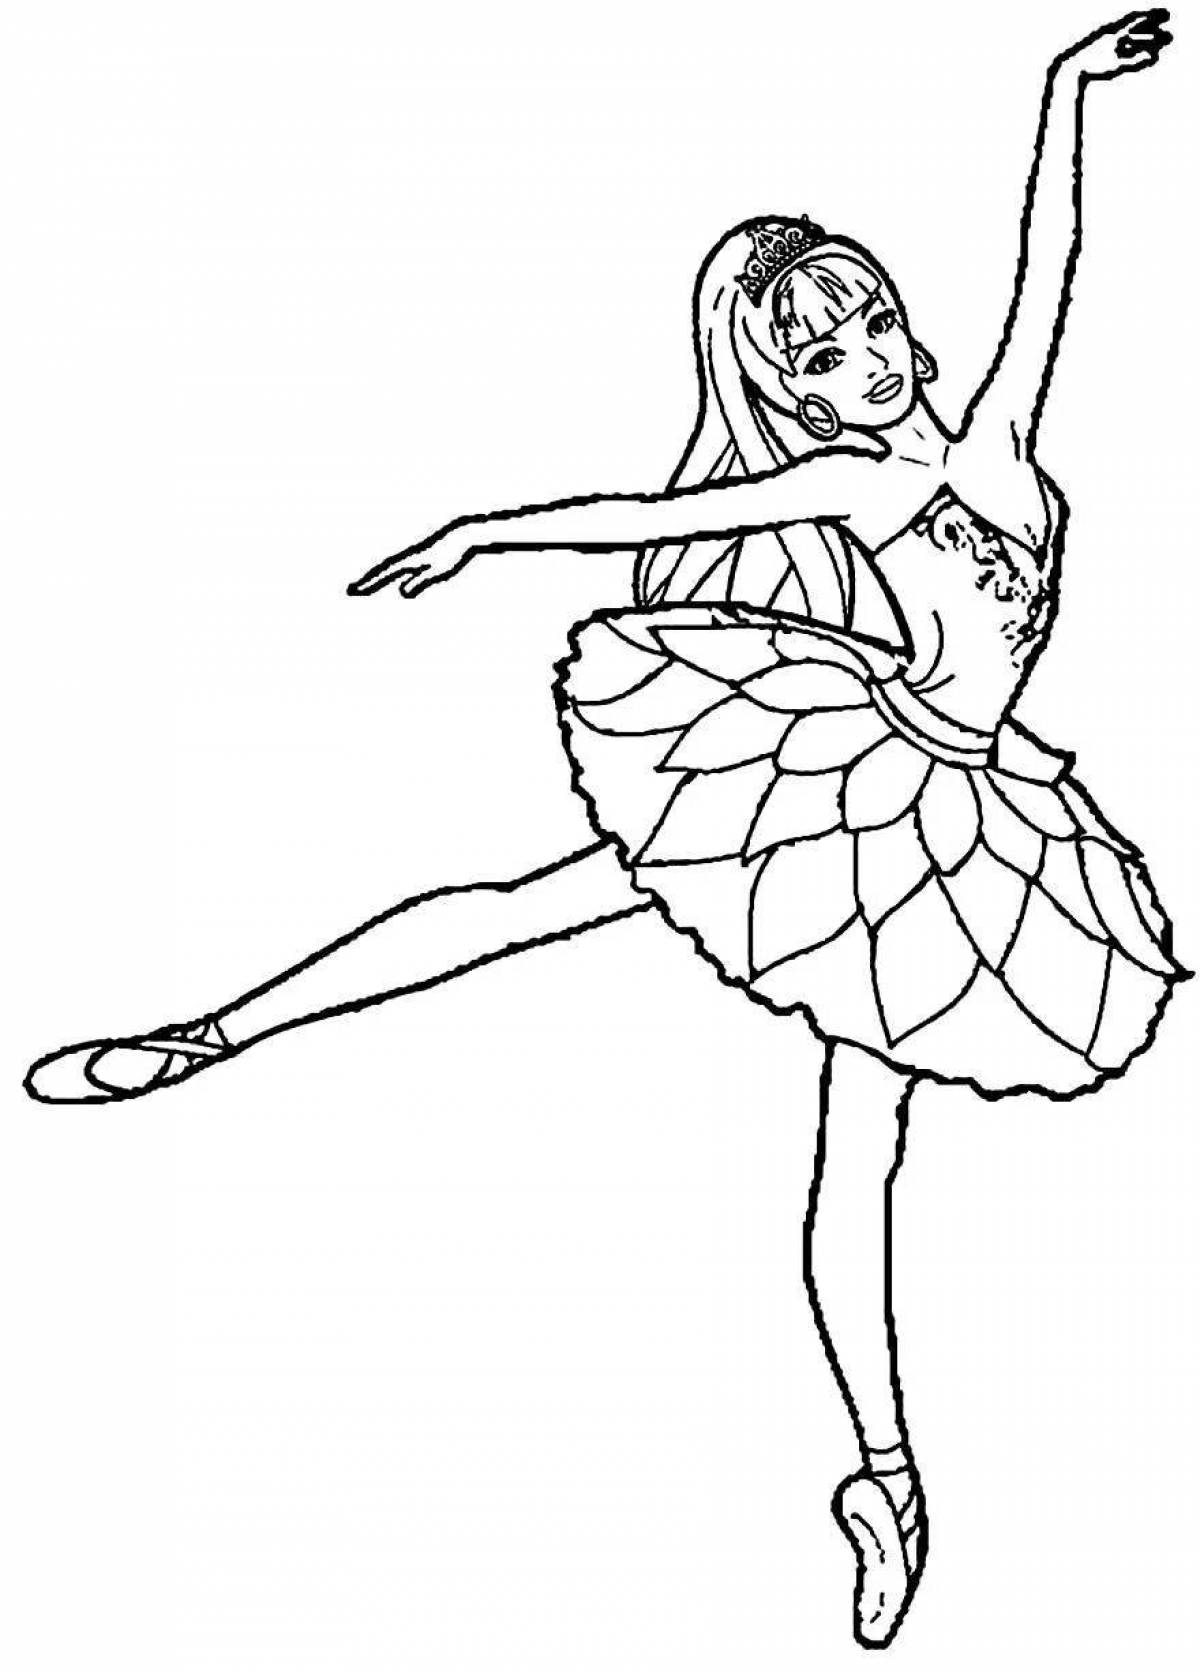 Colorful ballerina coloring page